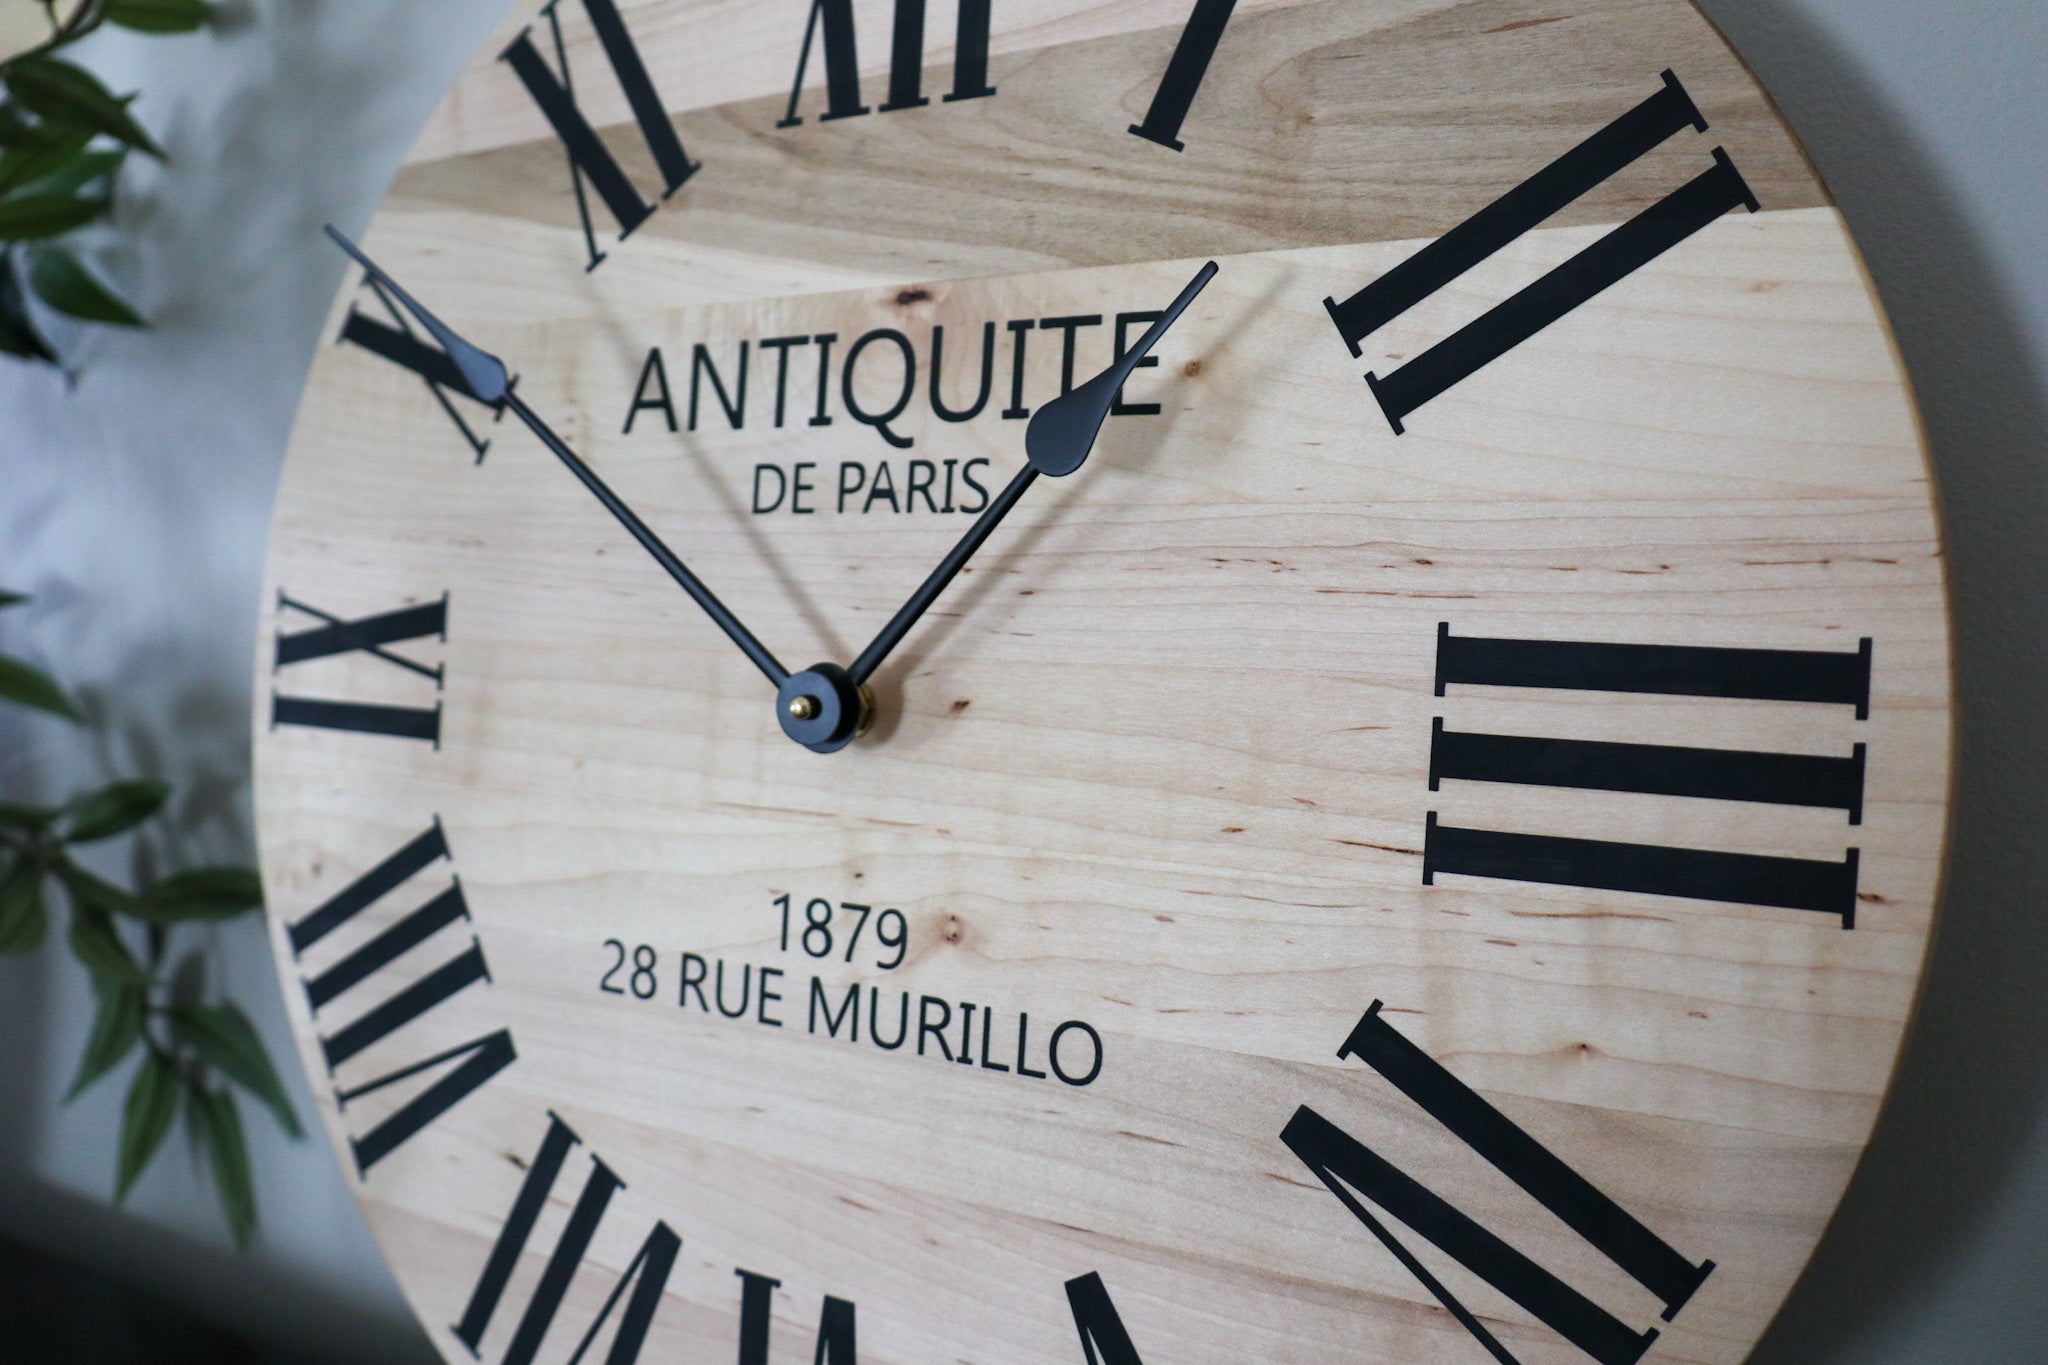 Large 18" French Style Maple Wall Clock (in stock)